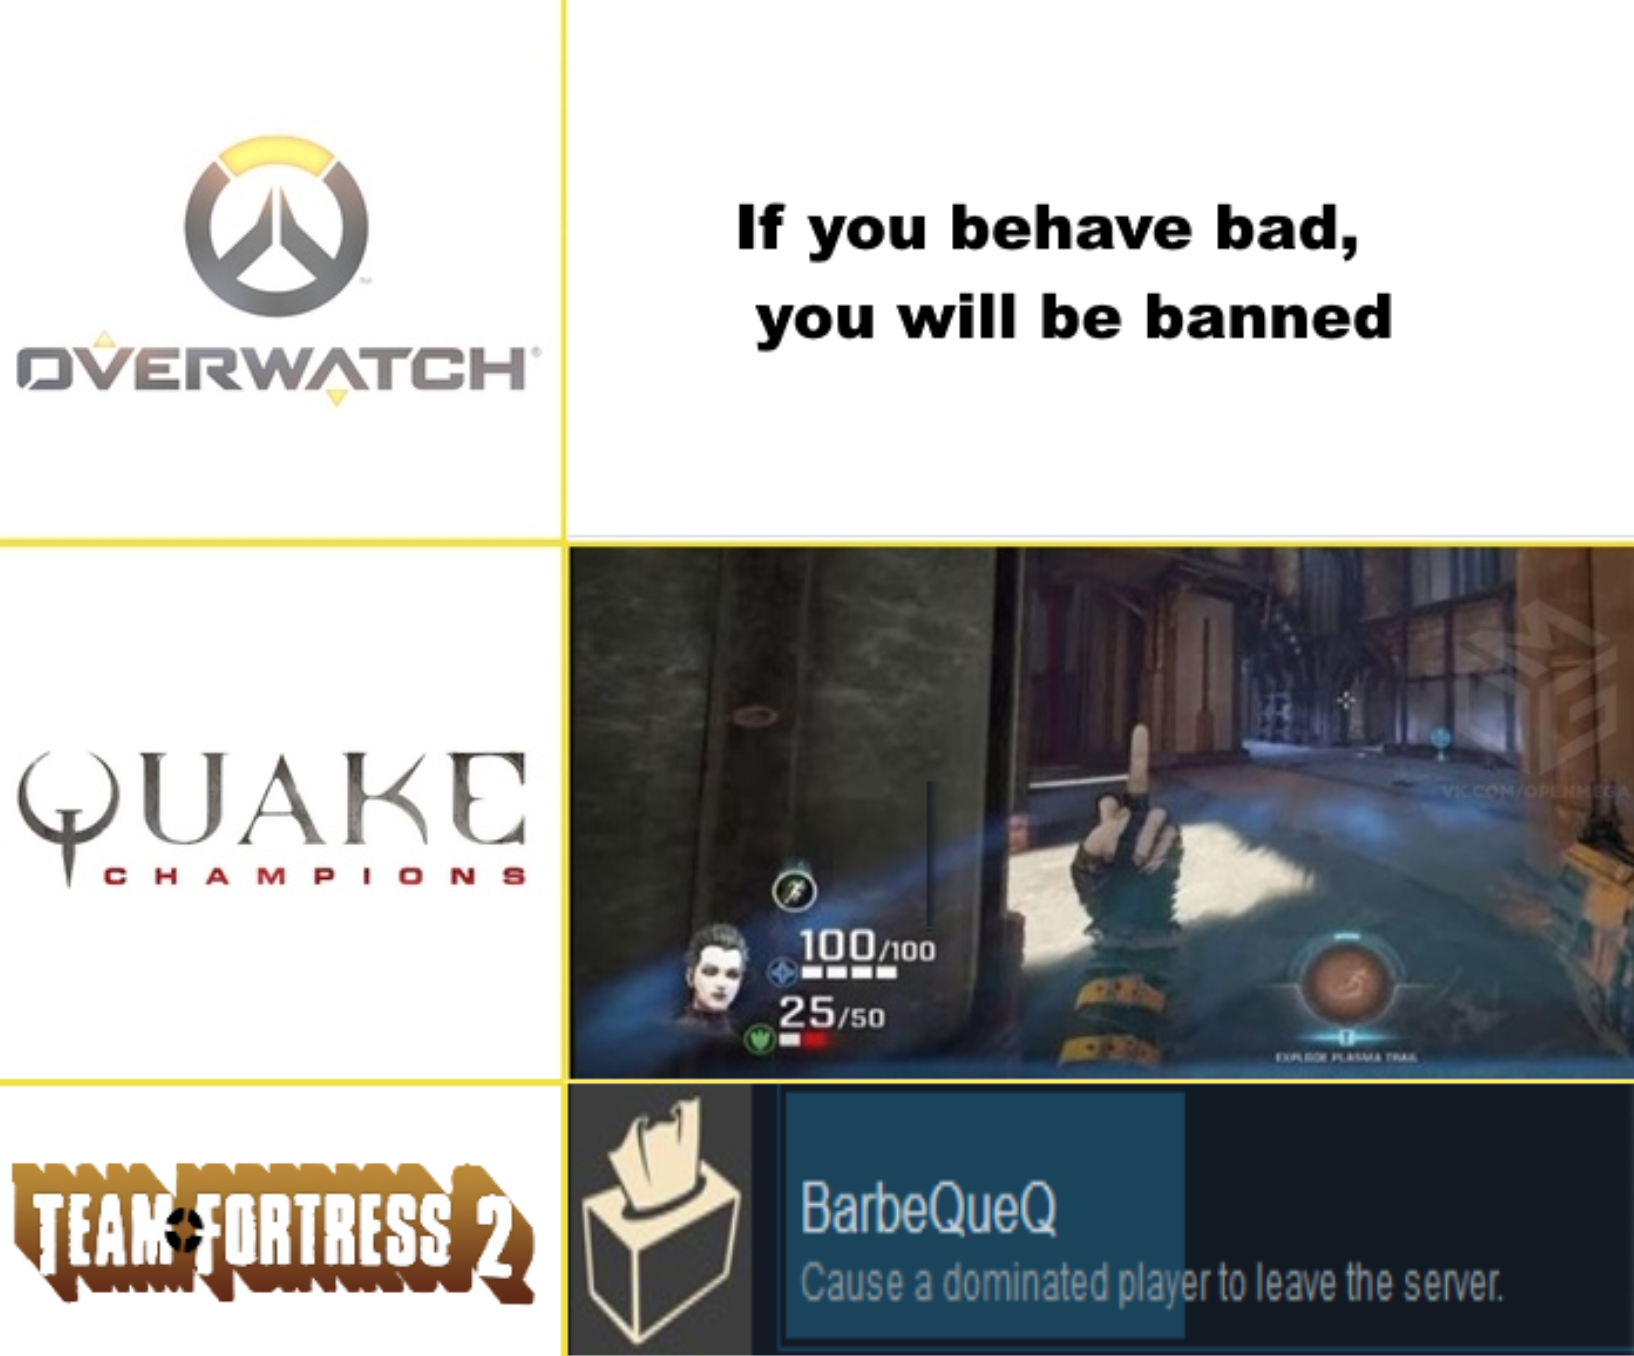 gaming memes - team fortress 2 - If you behave bad, you will be banned Dverwatch Quake Champions 100100 2550 Do Teak Fortress 2 BarbeQueQ Cause a dominated player to leave the server.